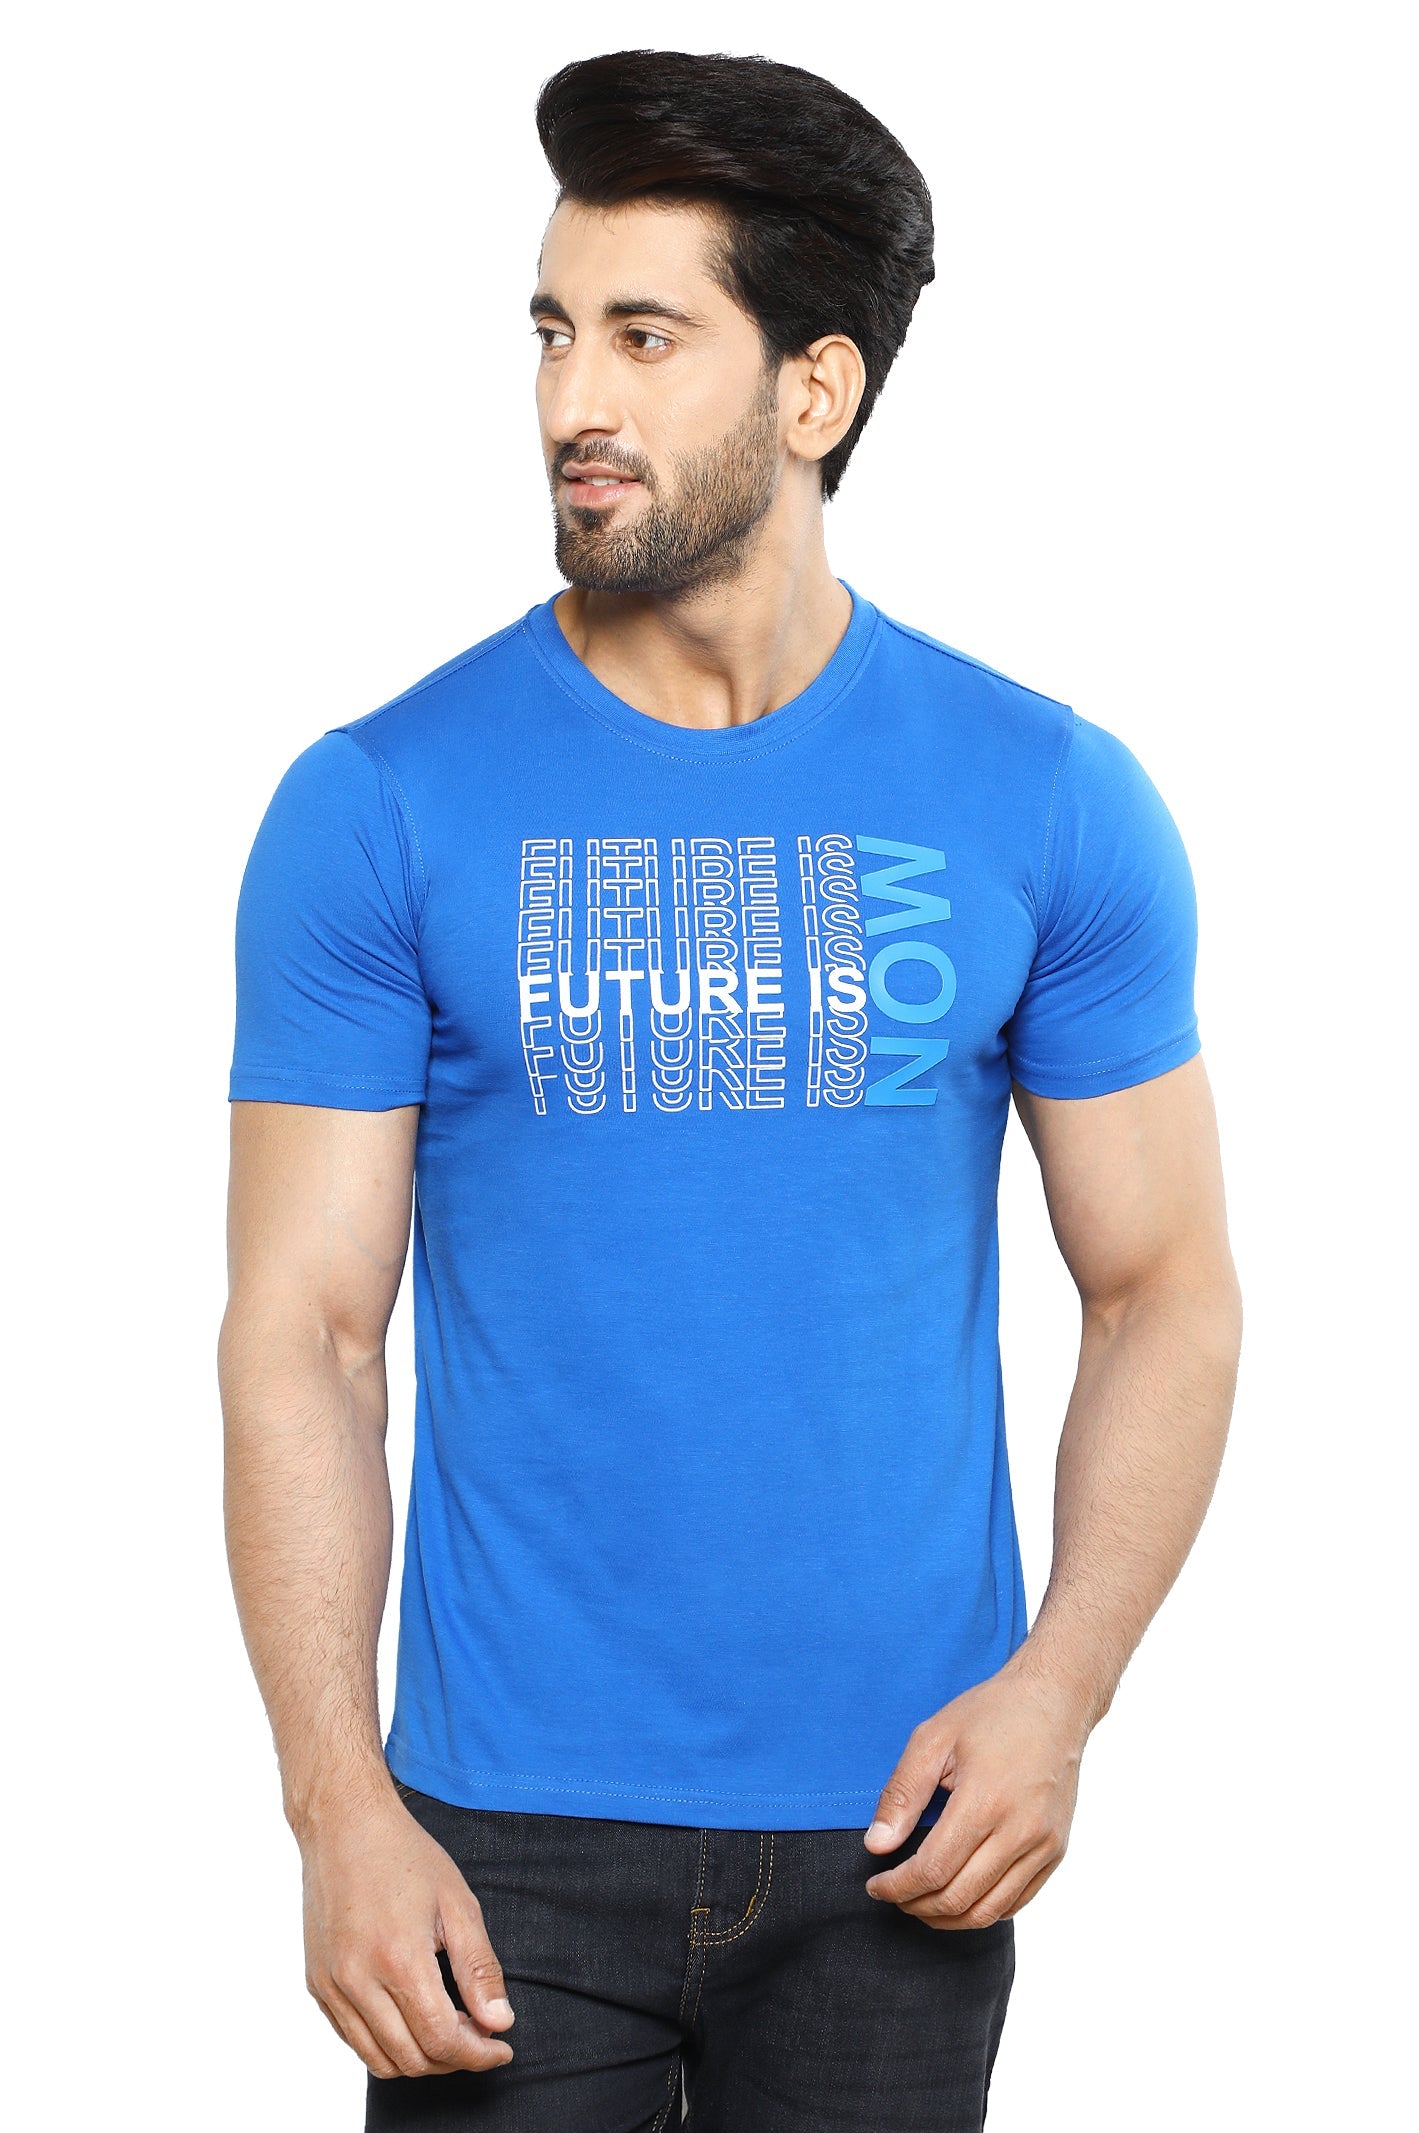 Diners Men's Round Neck T-Shirt SKU: NA815-R-BLUE - Diners